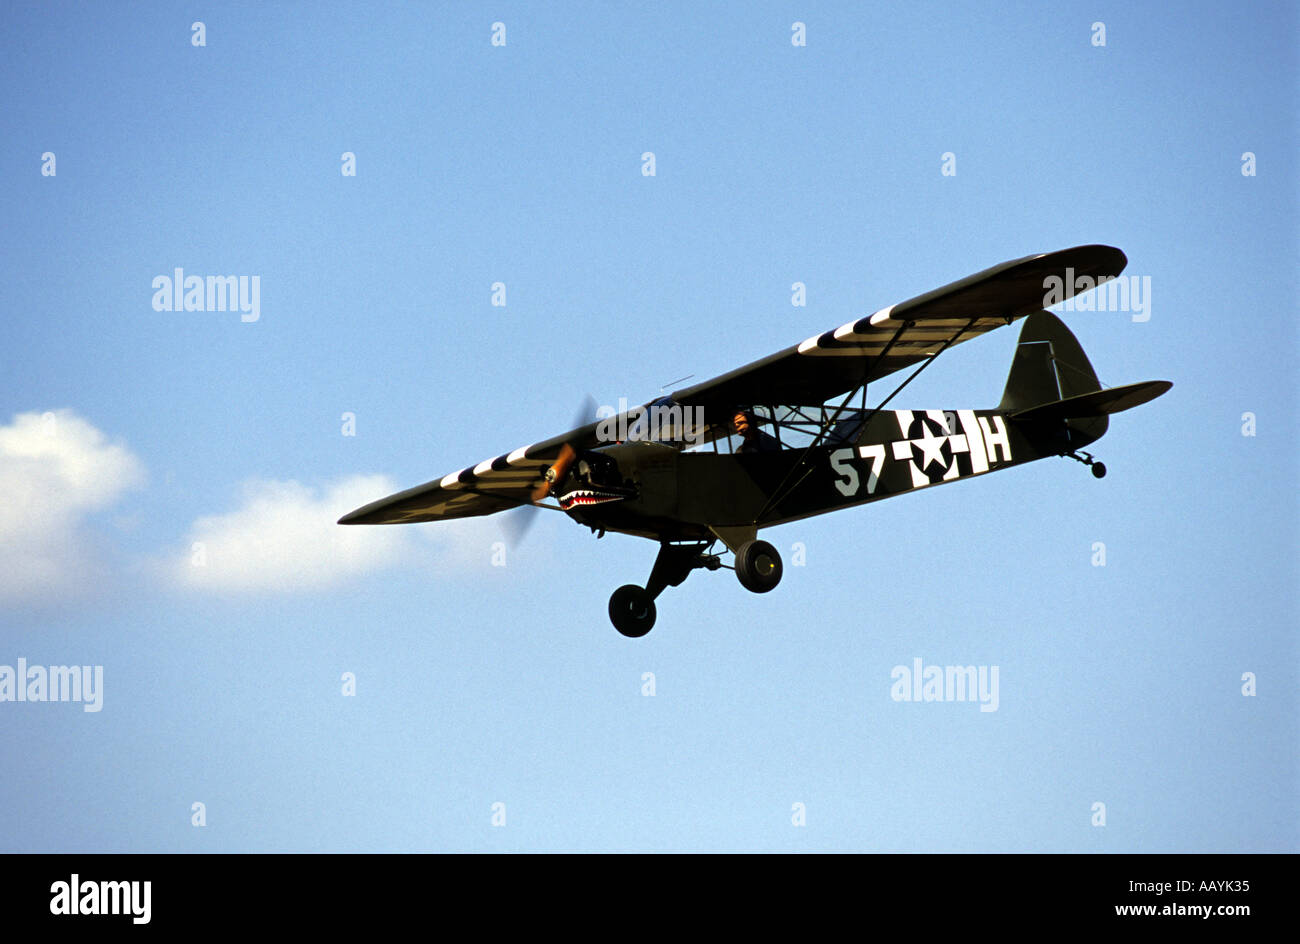 Taylorcraft L-2 observation or reconnaissance aircraft over Rougham airfield, Suffolk, England. Stock Photo